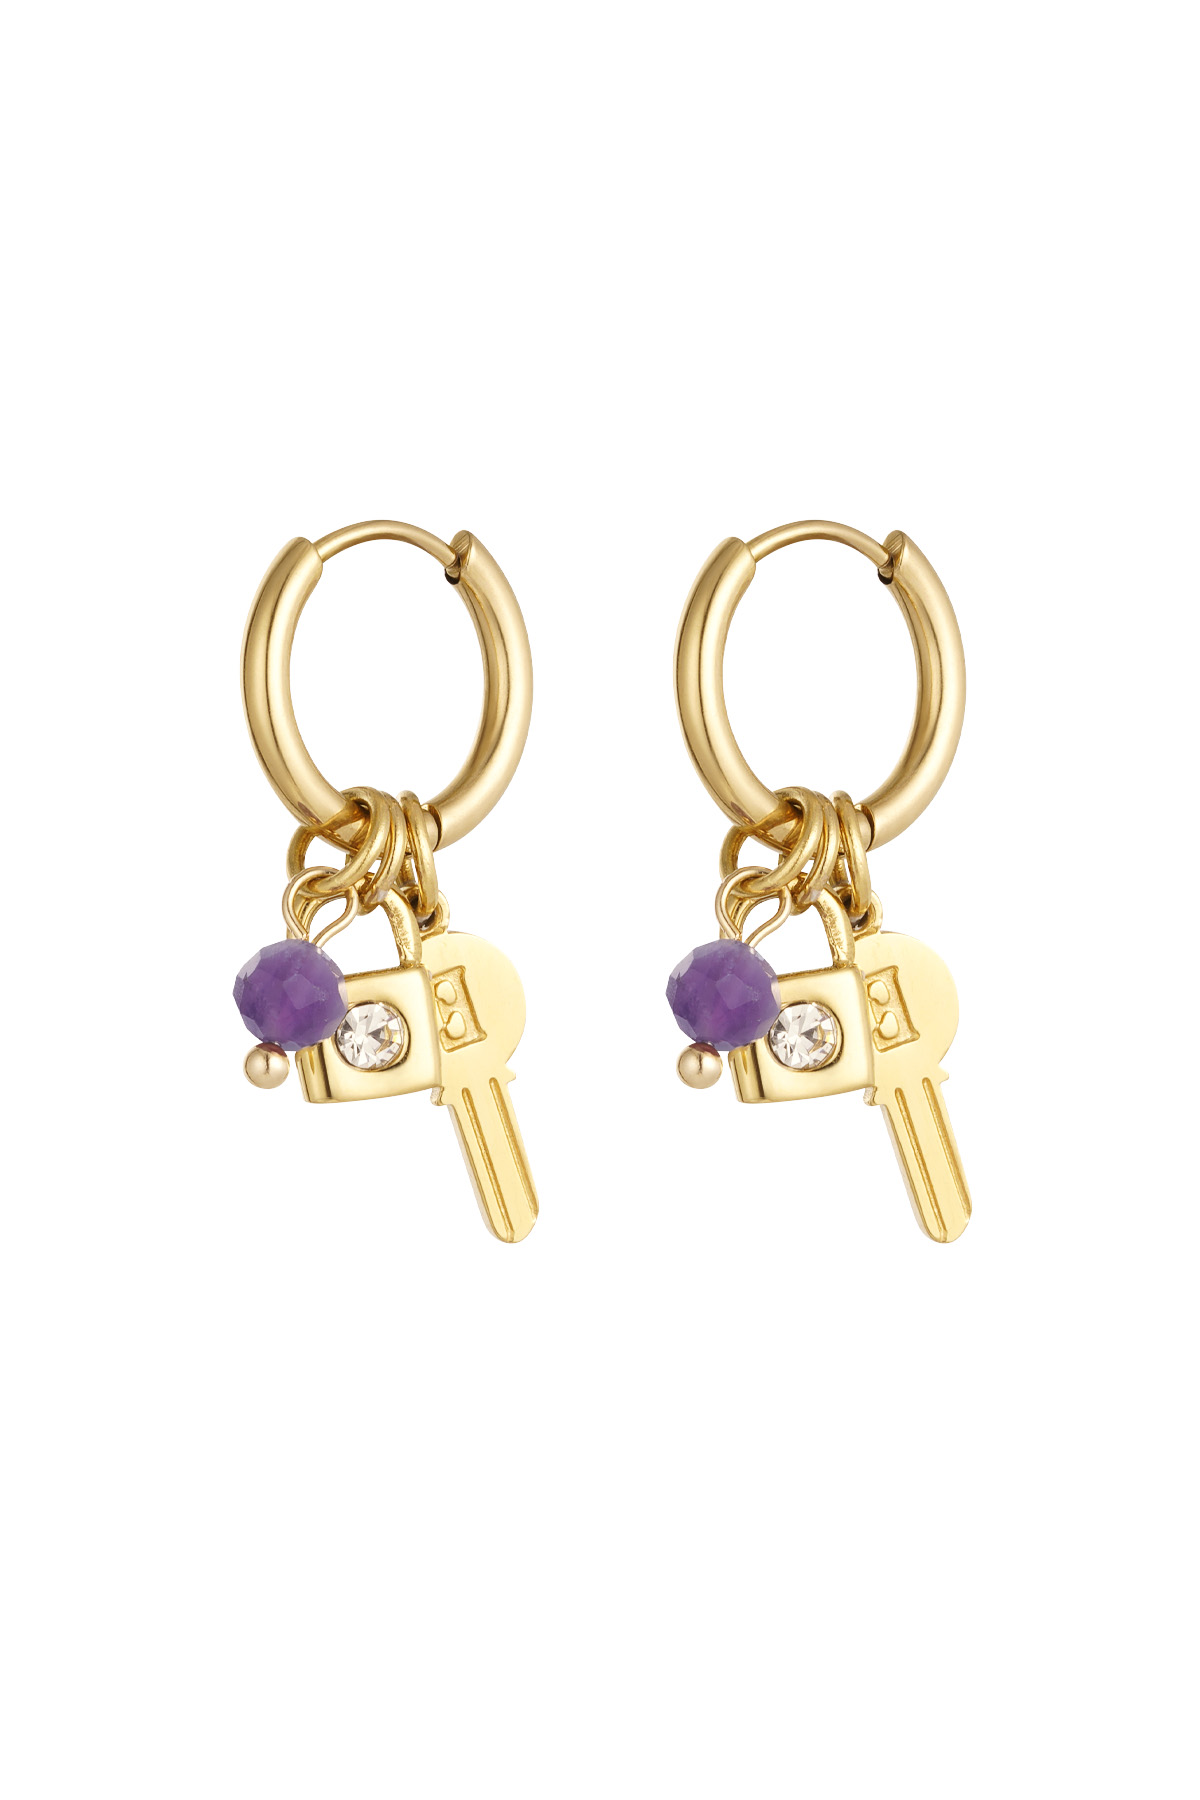 Key earrings with beads - gold/purple h5 